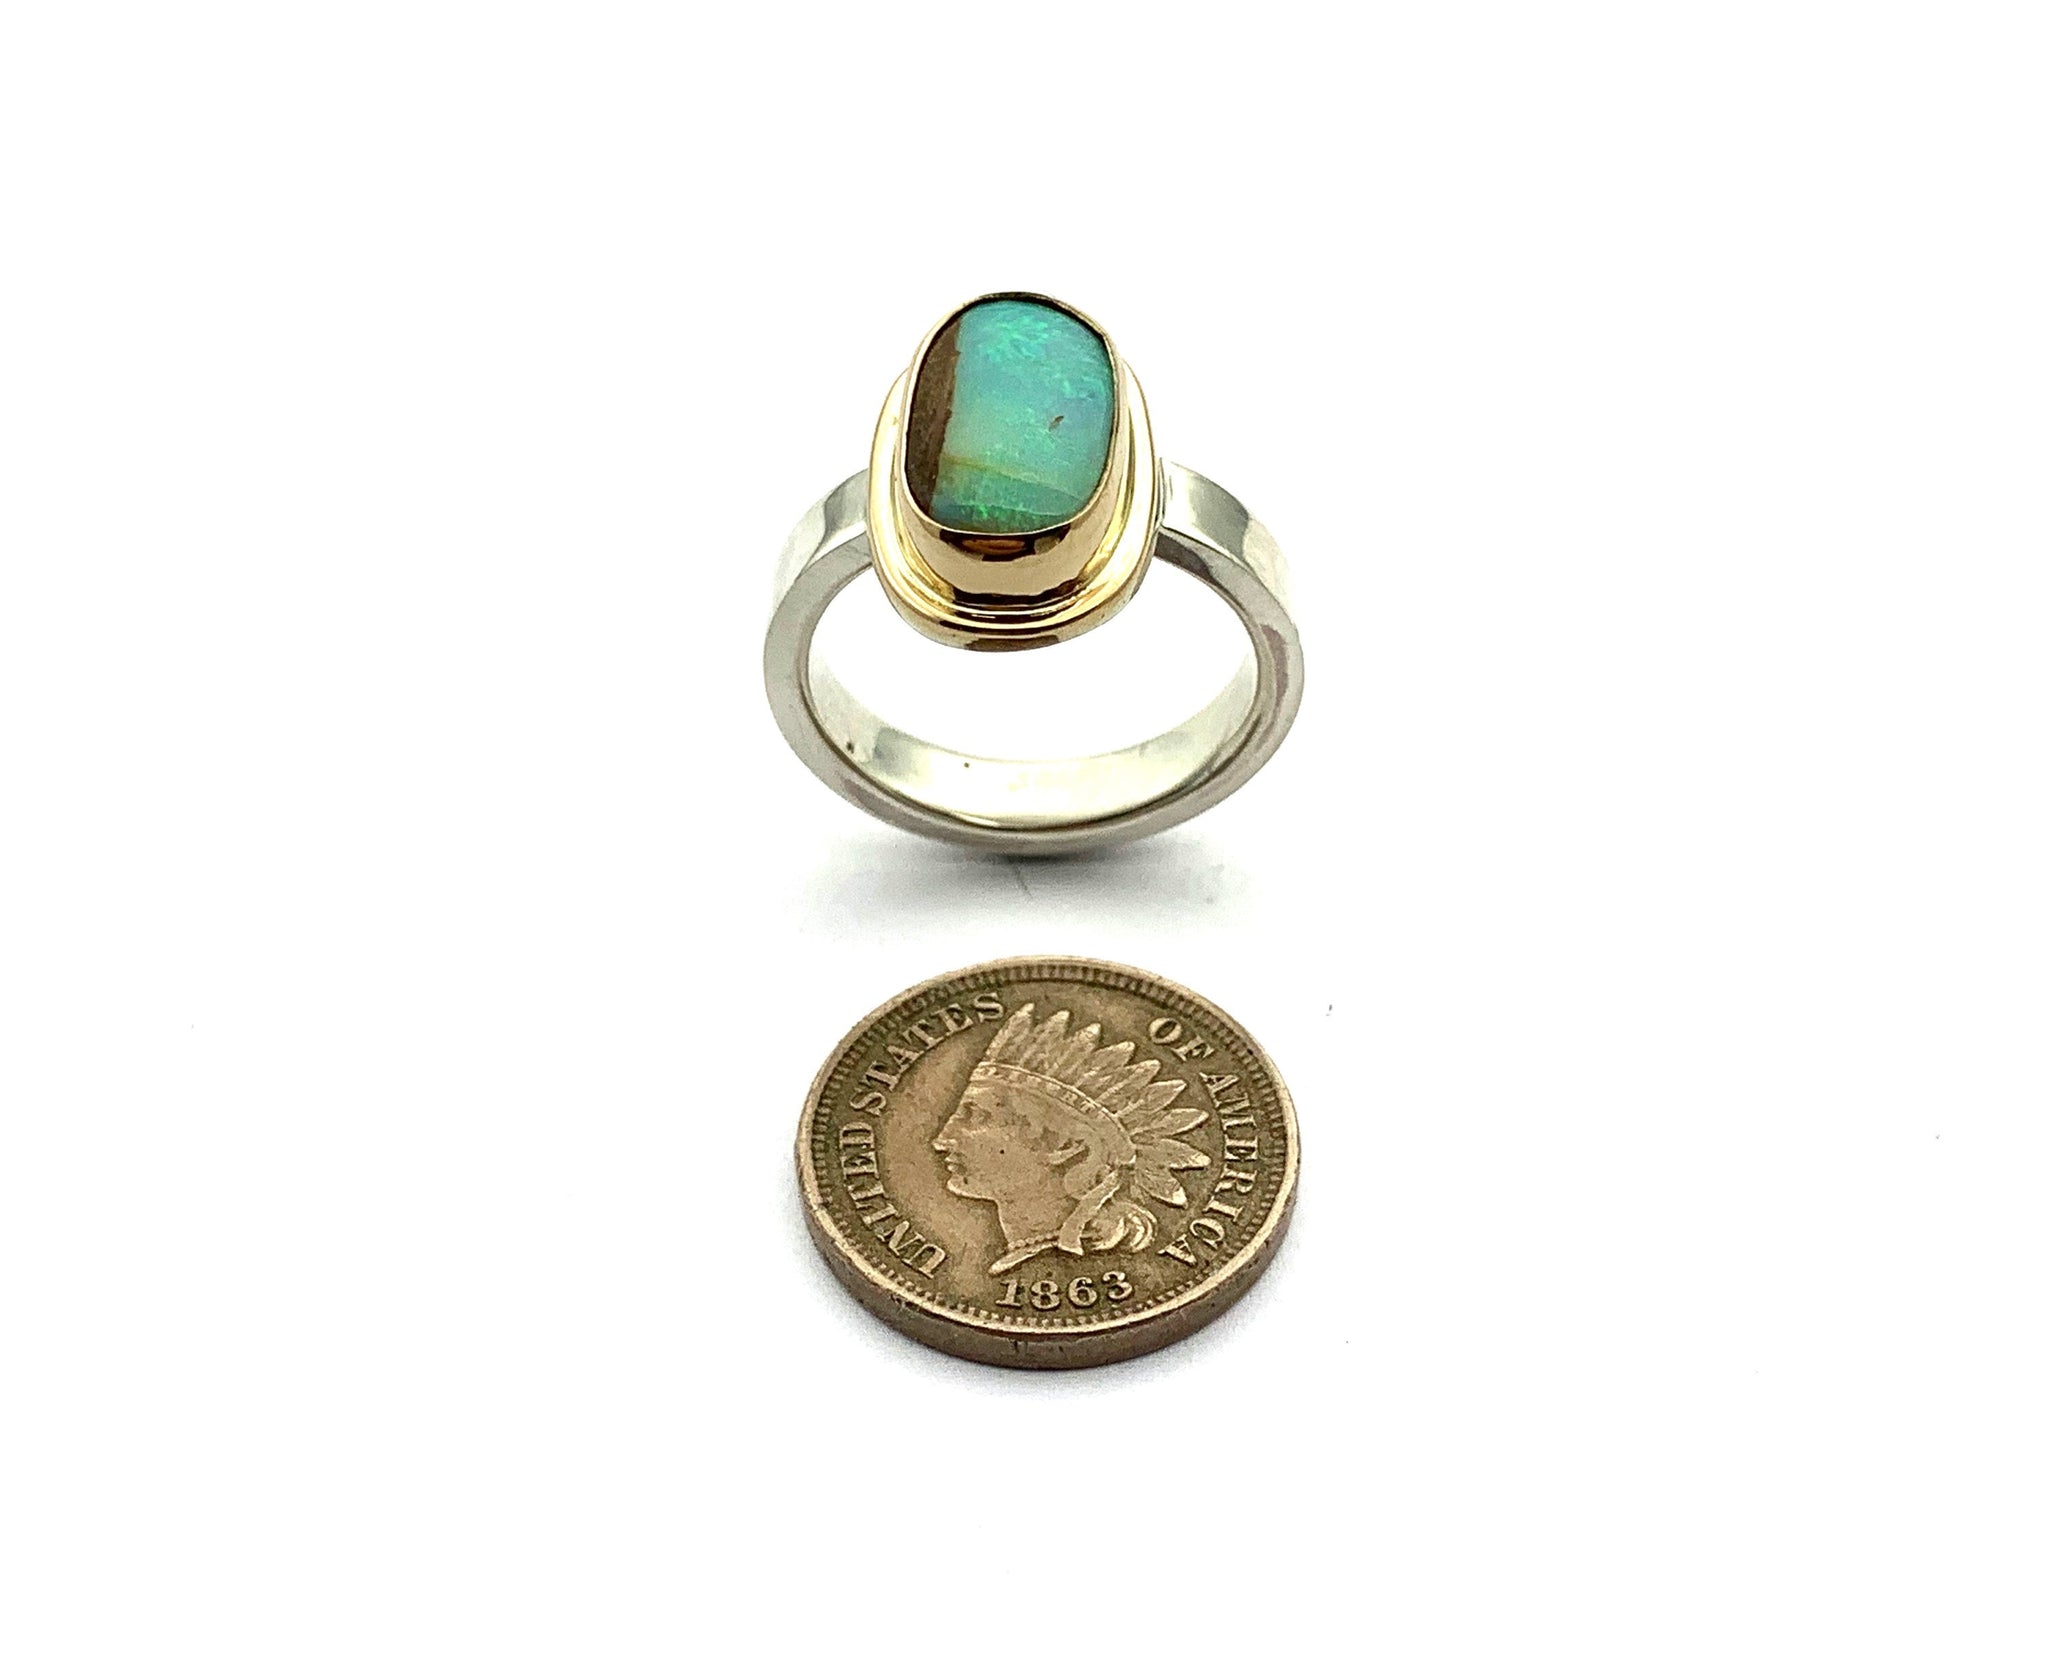 Australian Crystal Pipe Opal Ring in 14k Gold and Silver